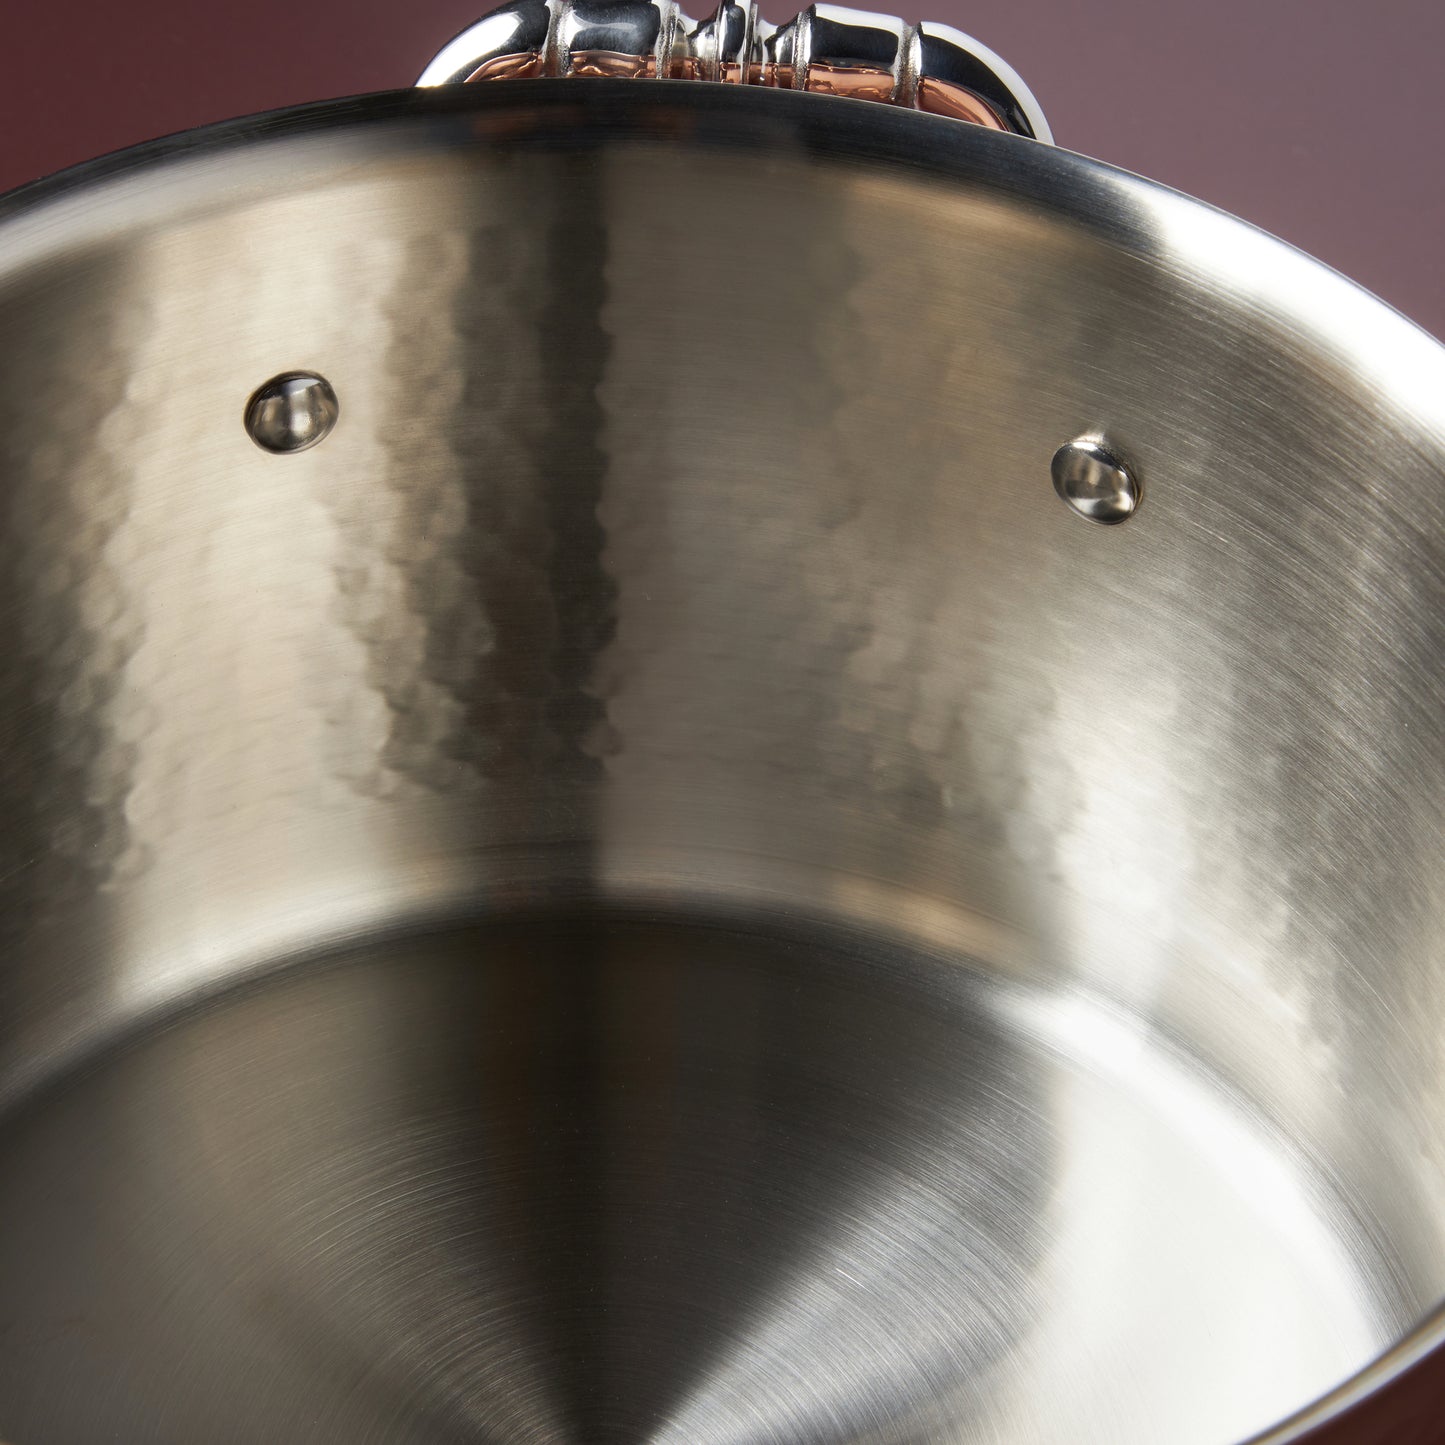 hammered stainless steel lining in large stockpot from Ruffoni